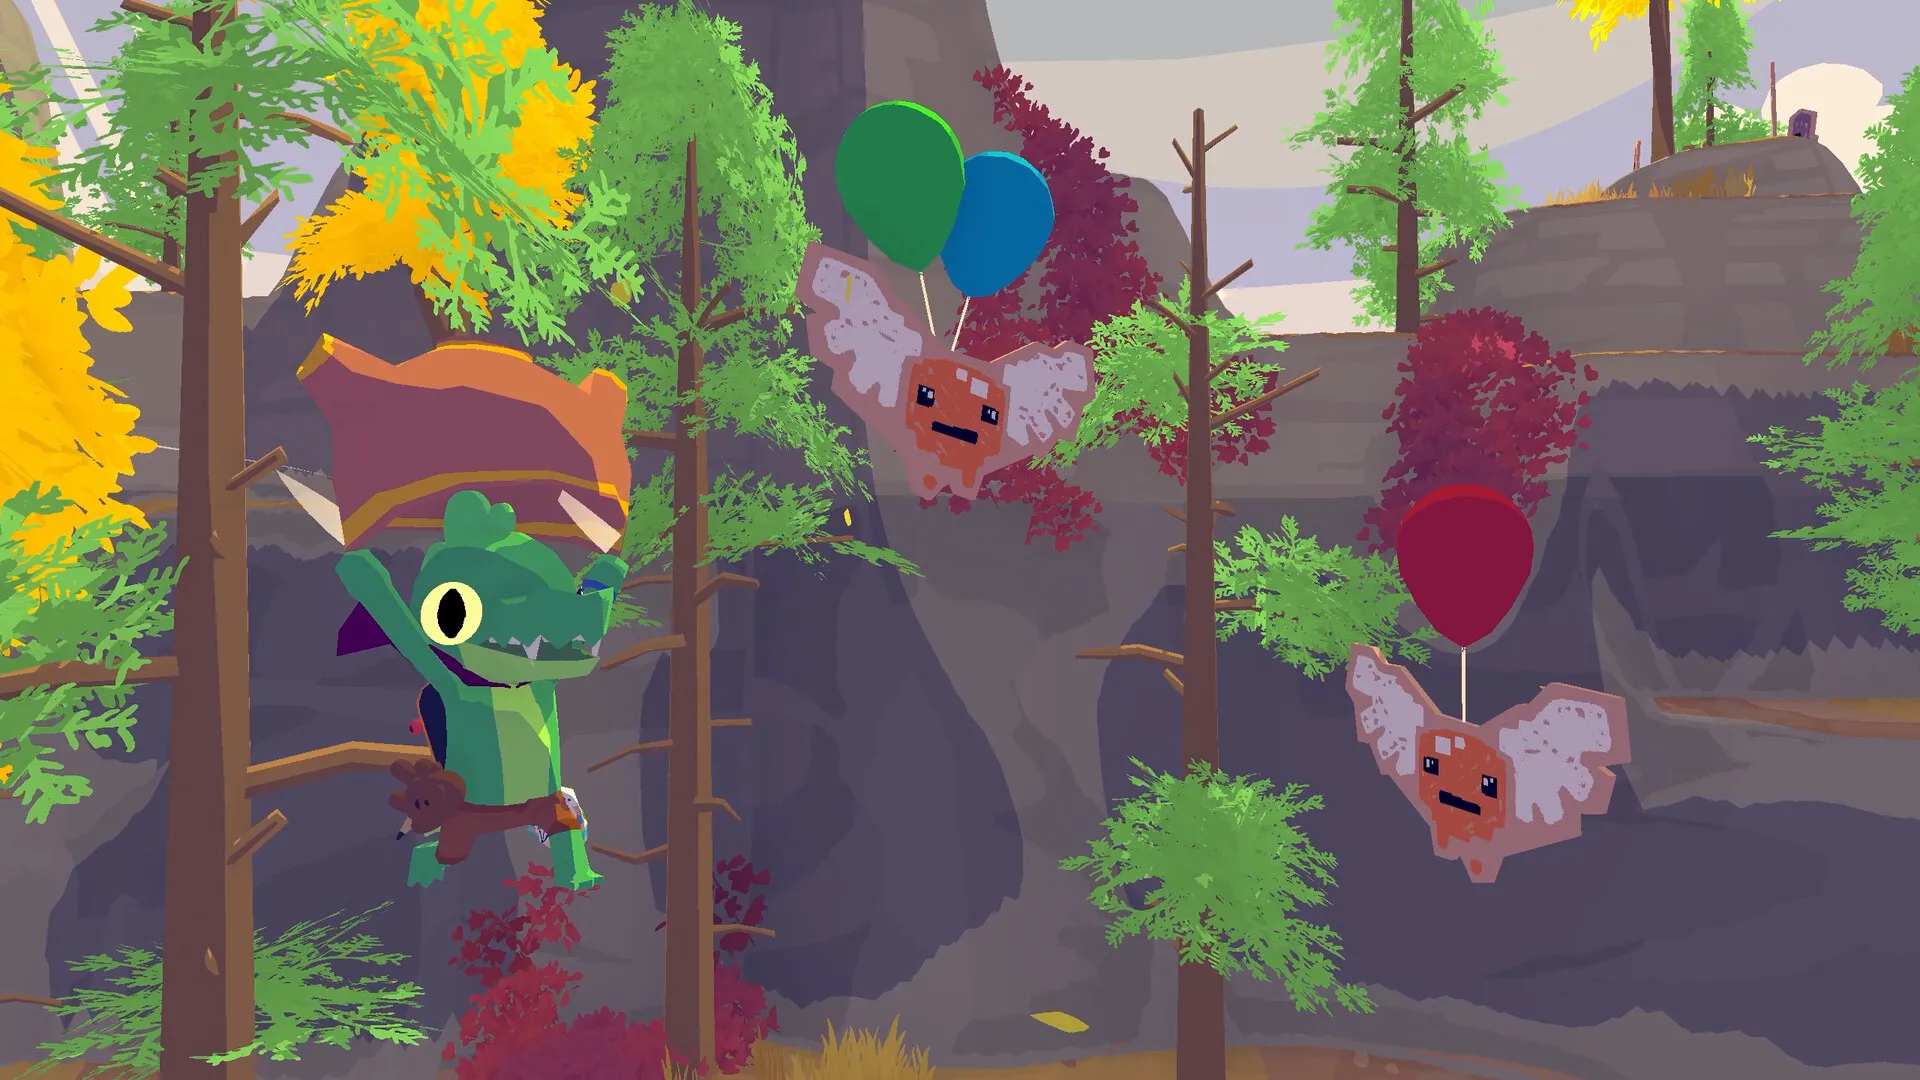 Review: Lil' Gator Game is a Love Letter to A Short Hike and BOTW